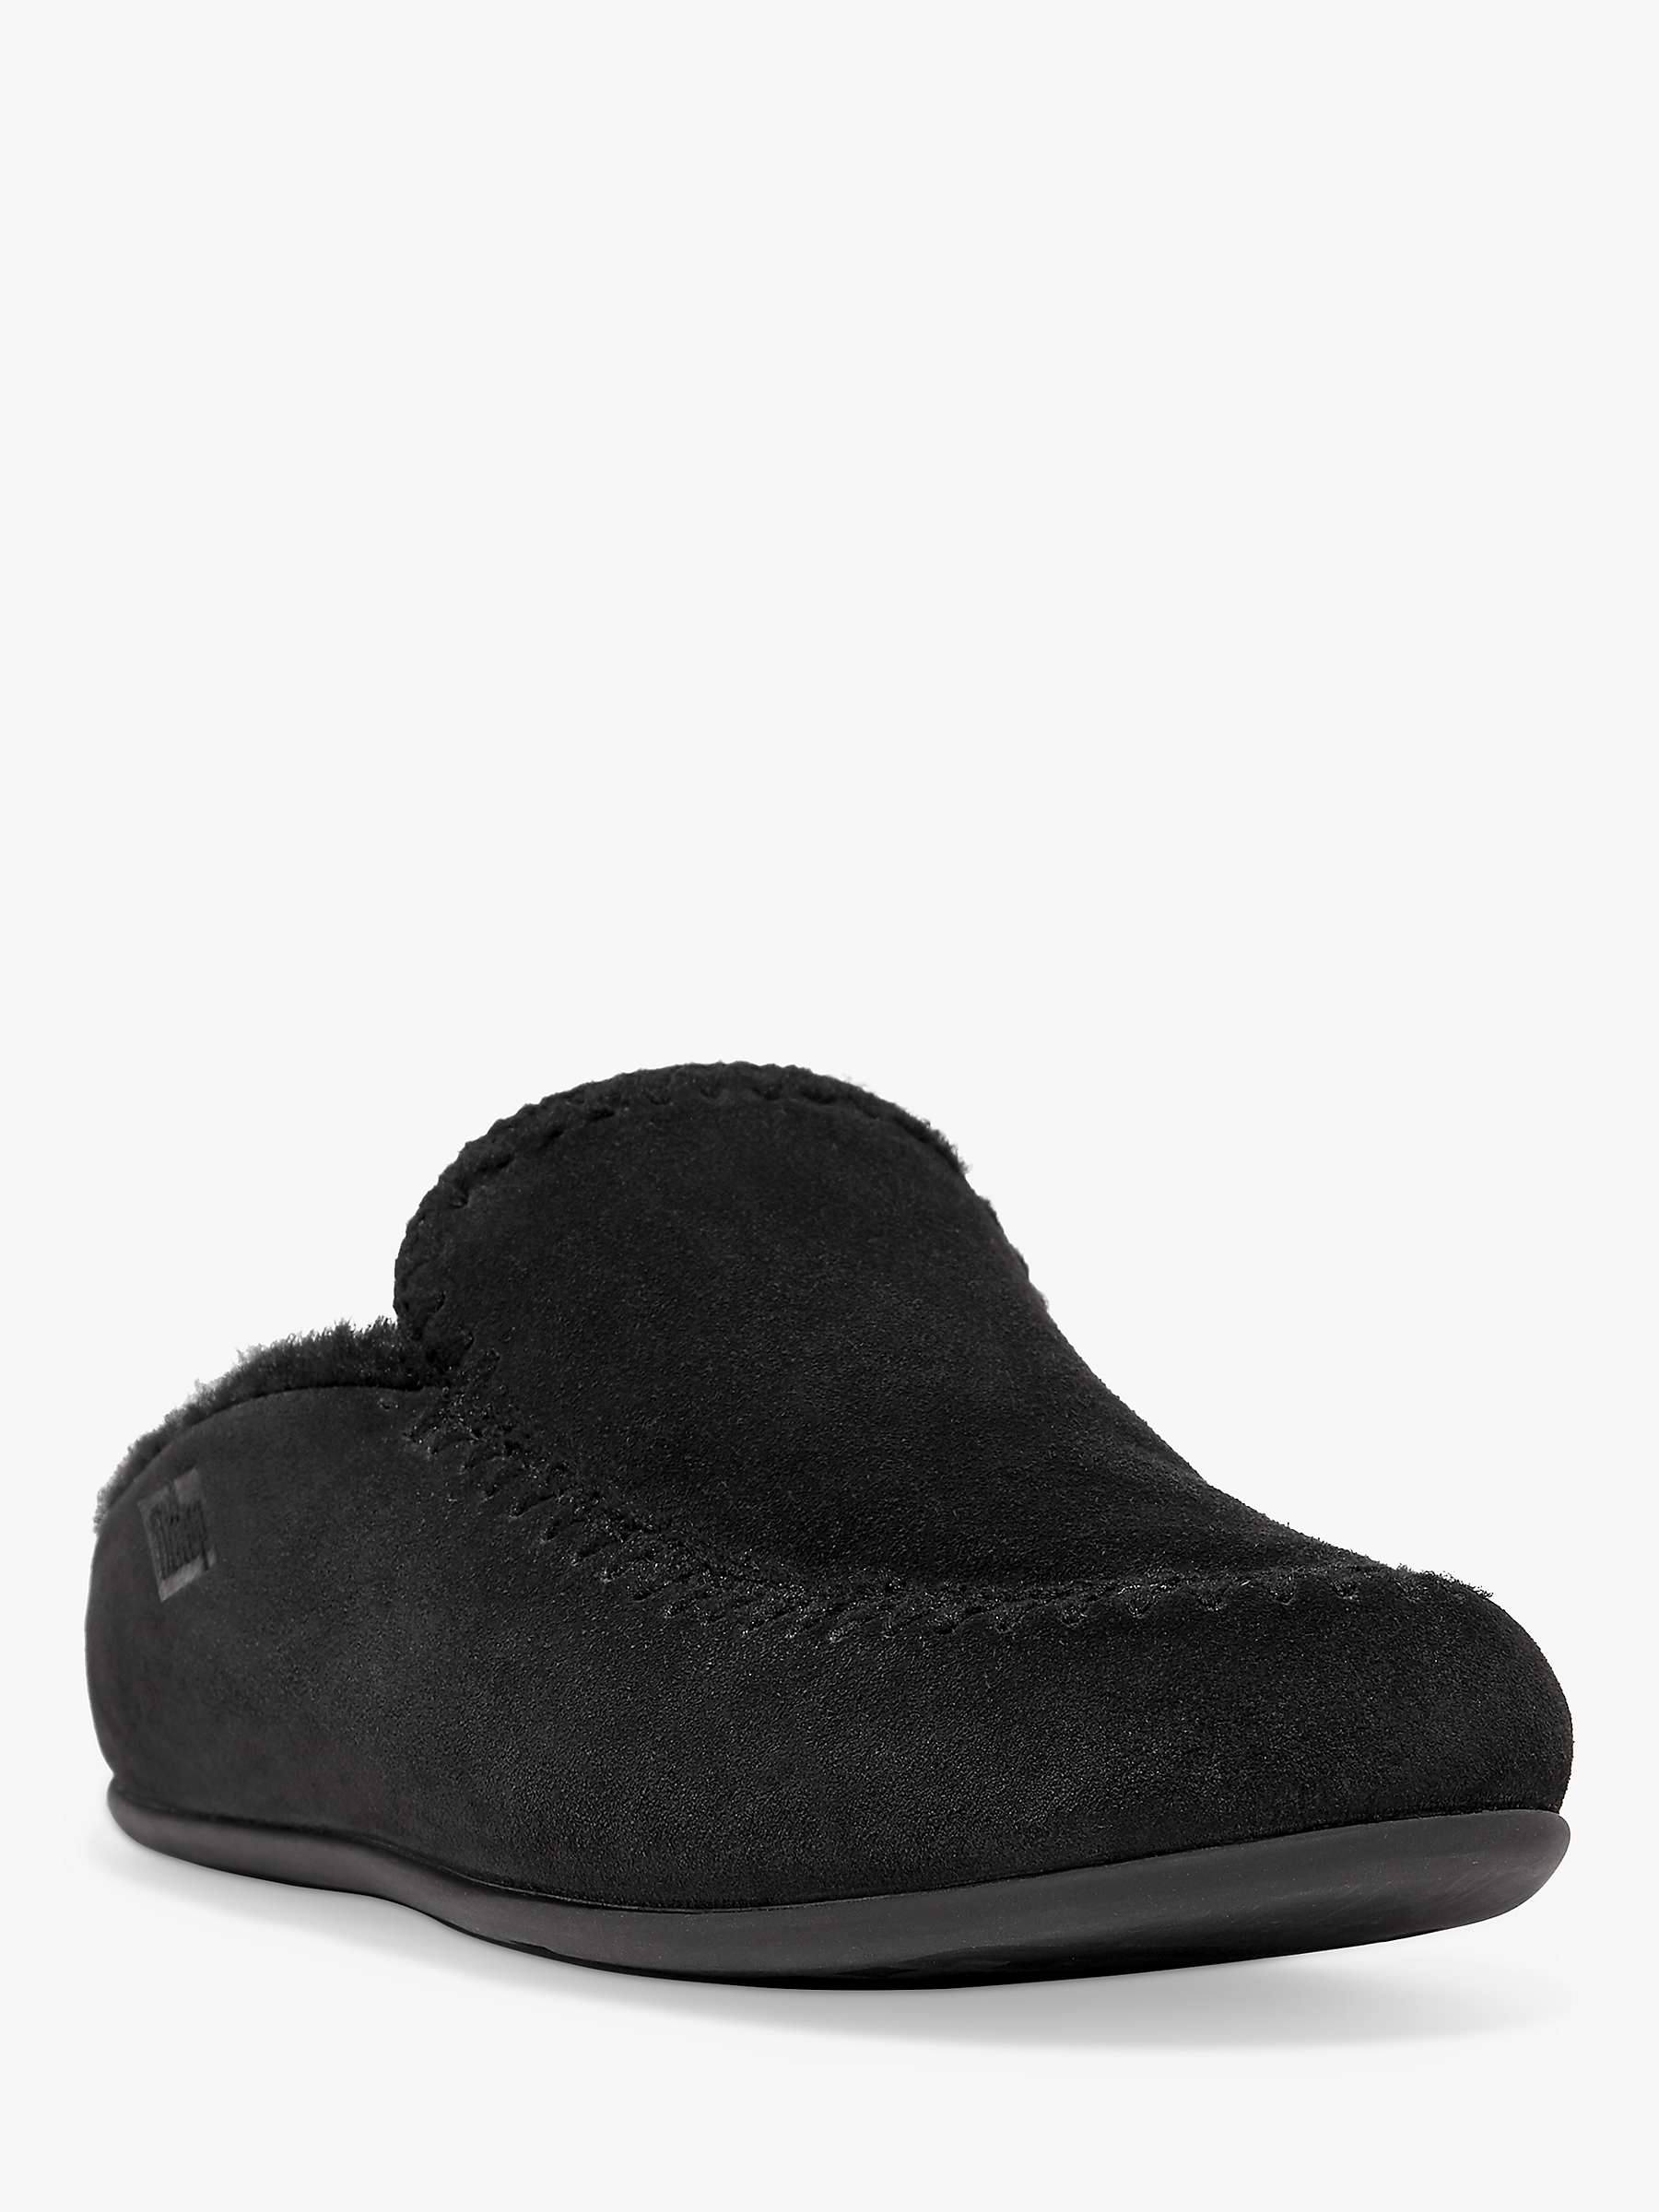 Buy FitFlop Chrissie II Haus Crochet Stitch Shearling Slippers Online at johnlewis.com